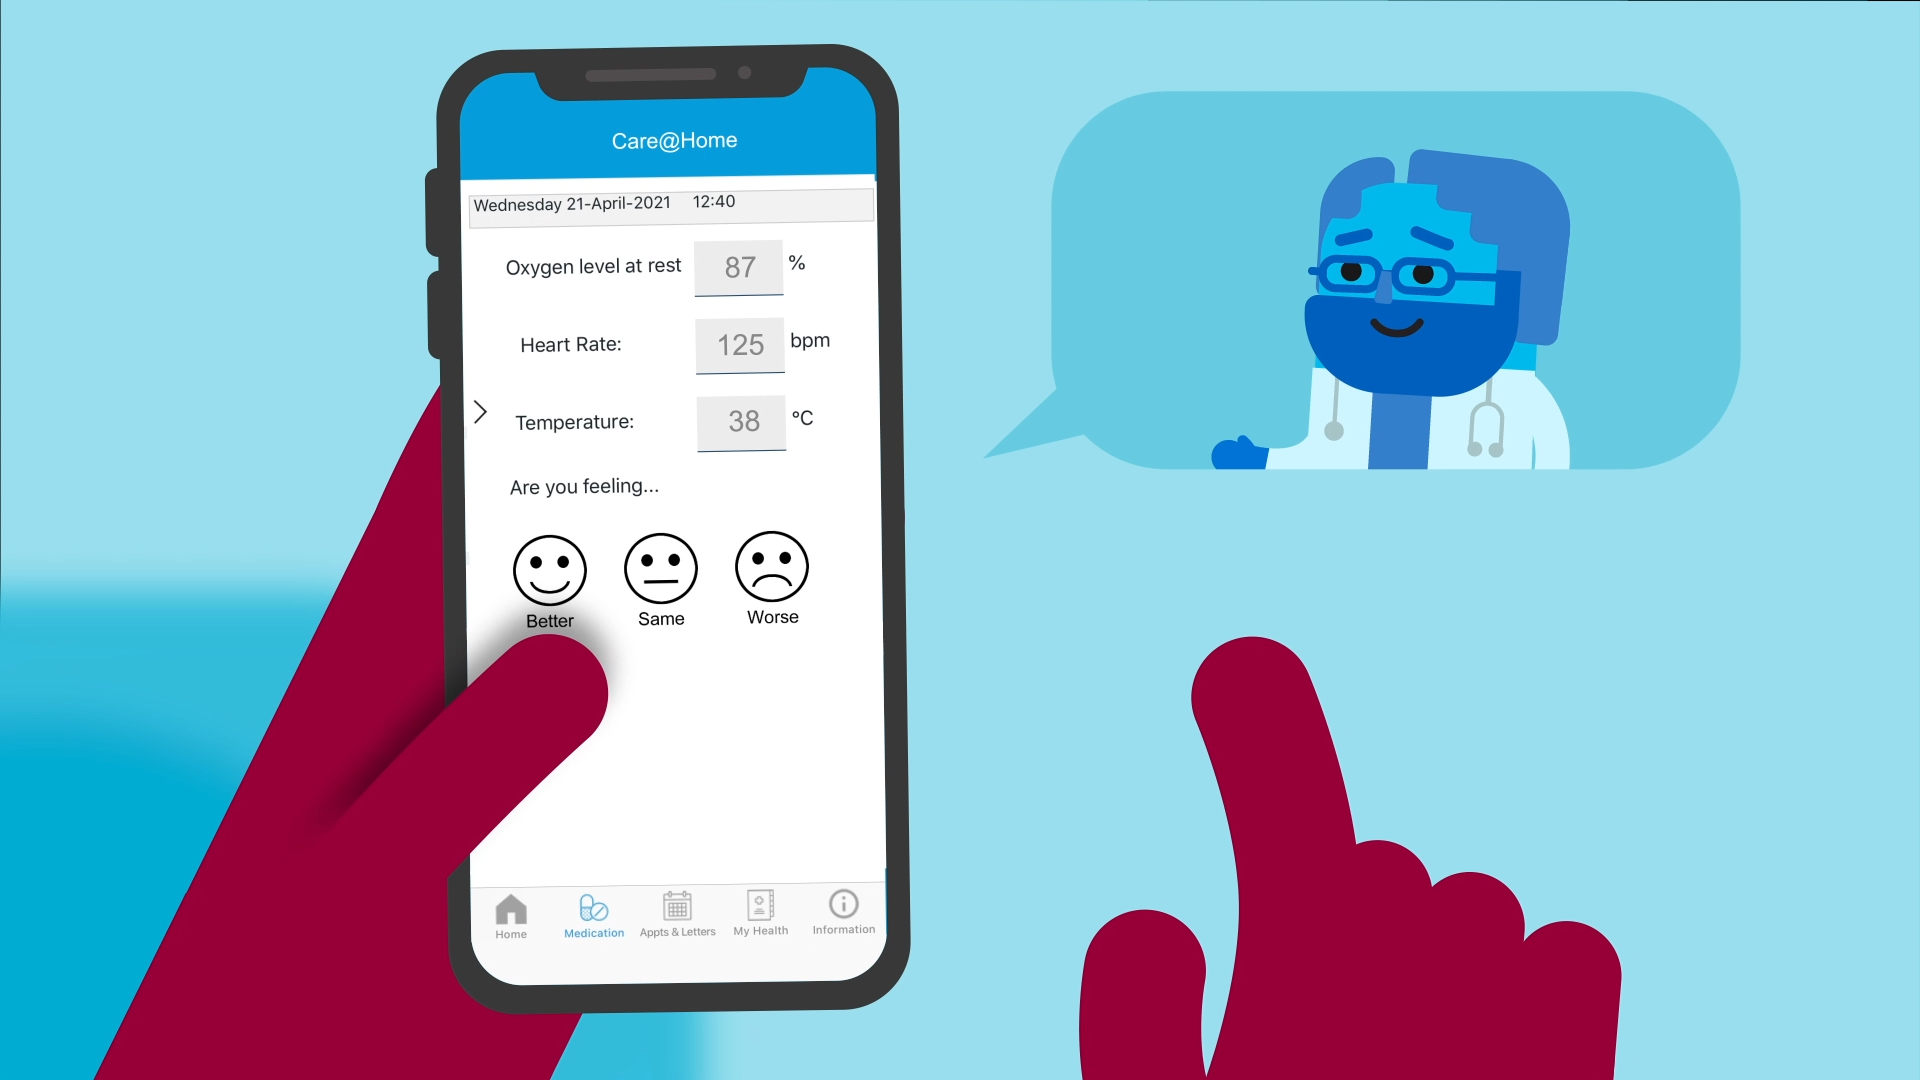 Still from animation promoting the Connected Care App in Frimley - depicting an app screen asking for feedback